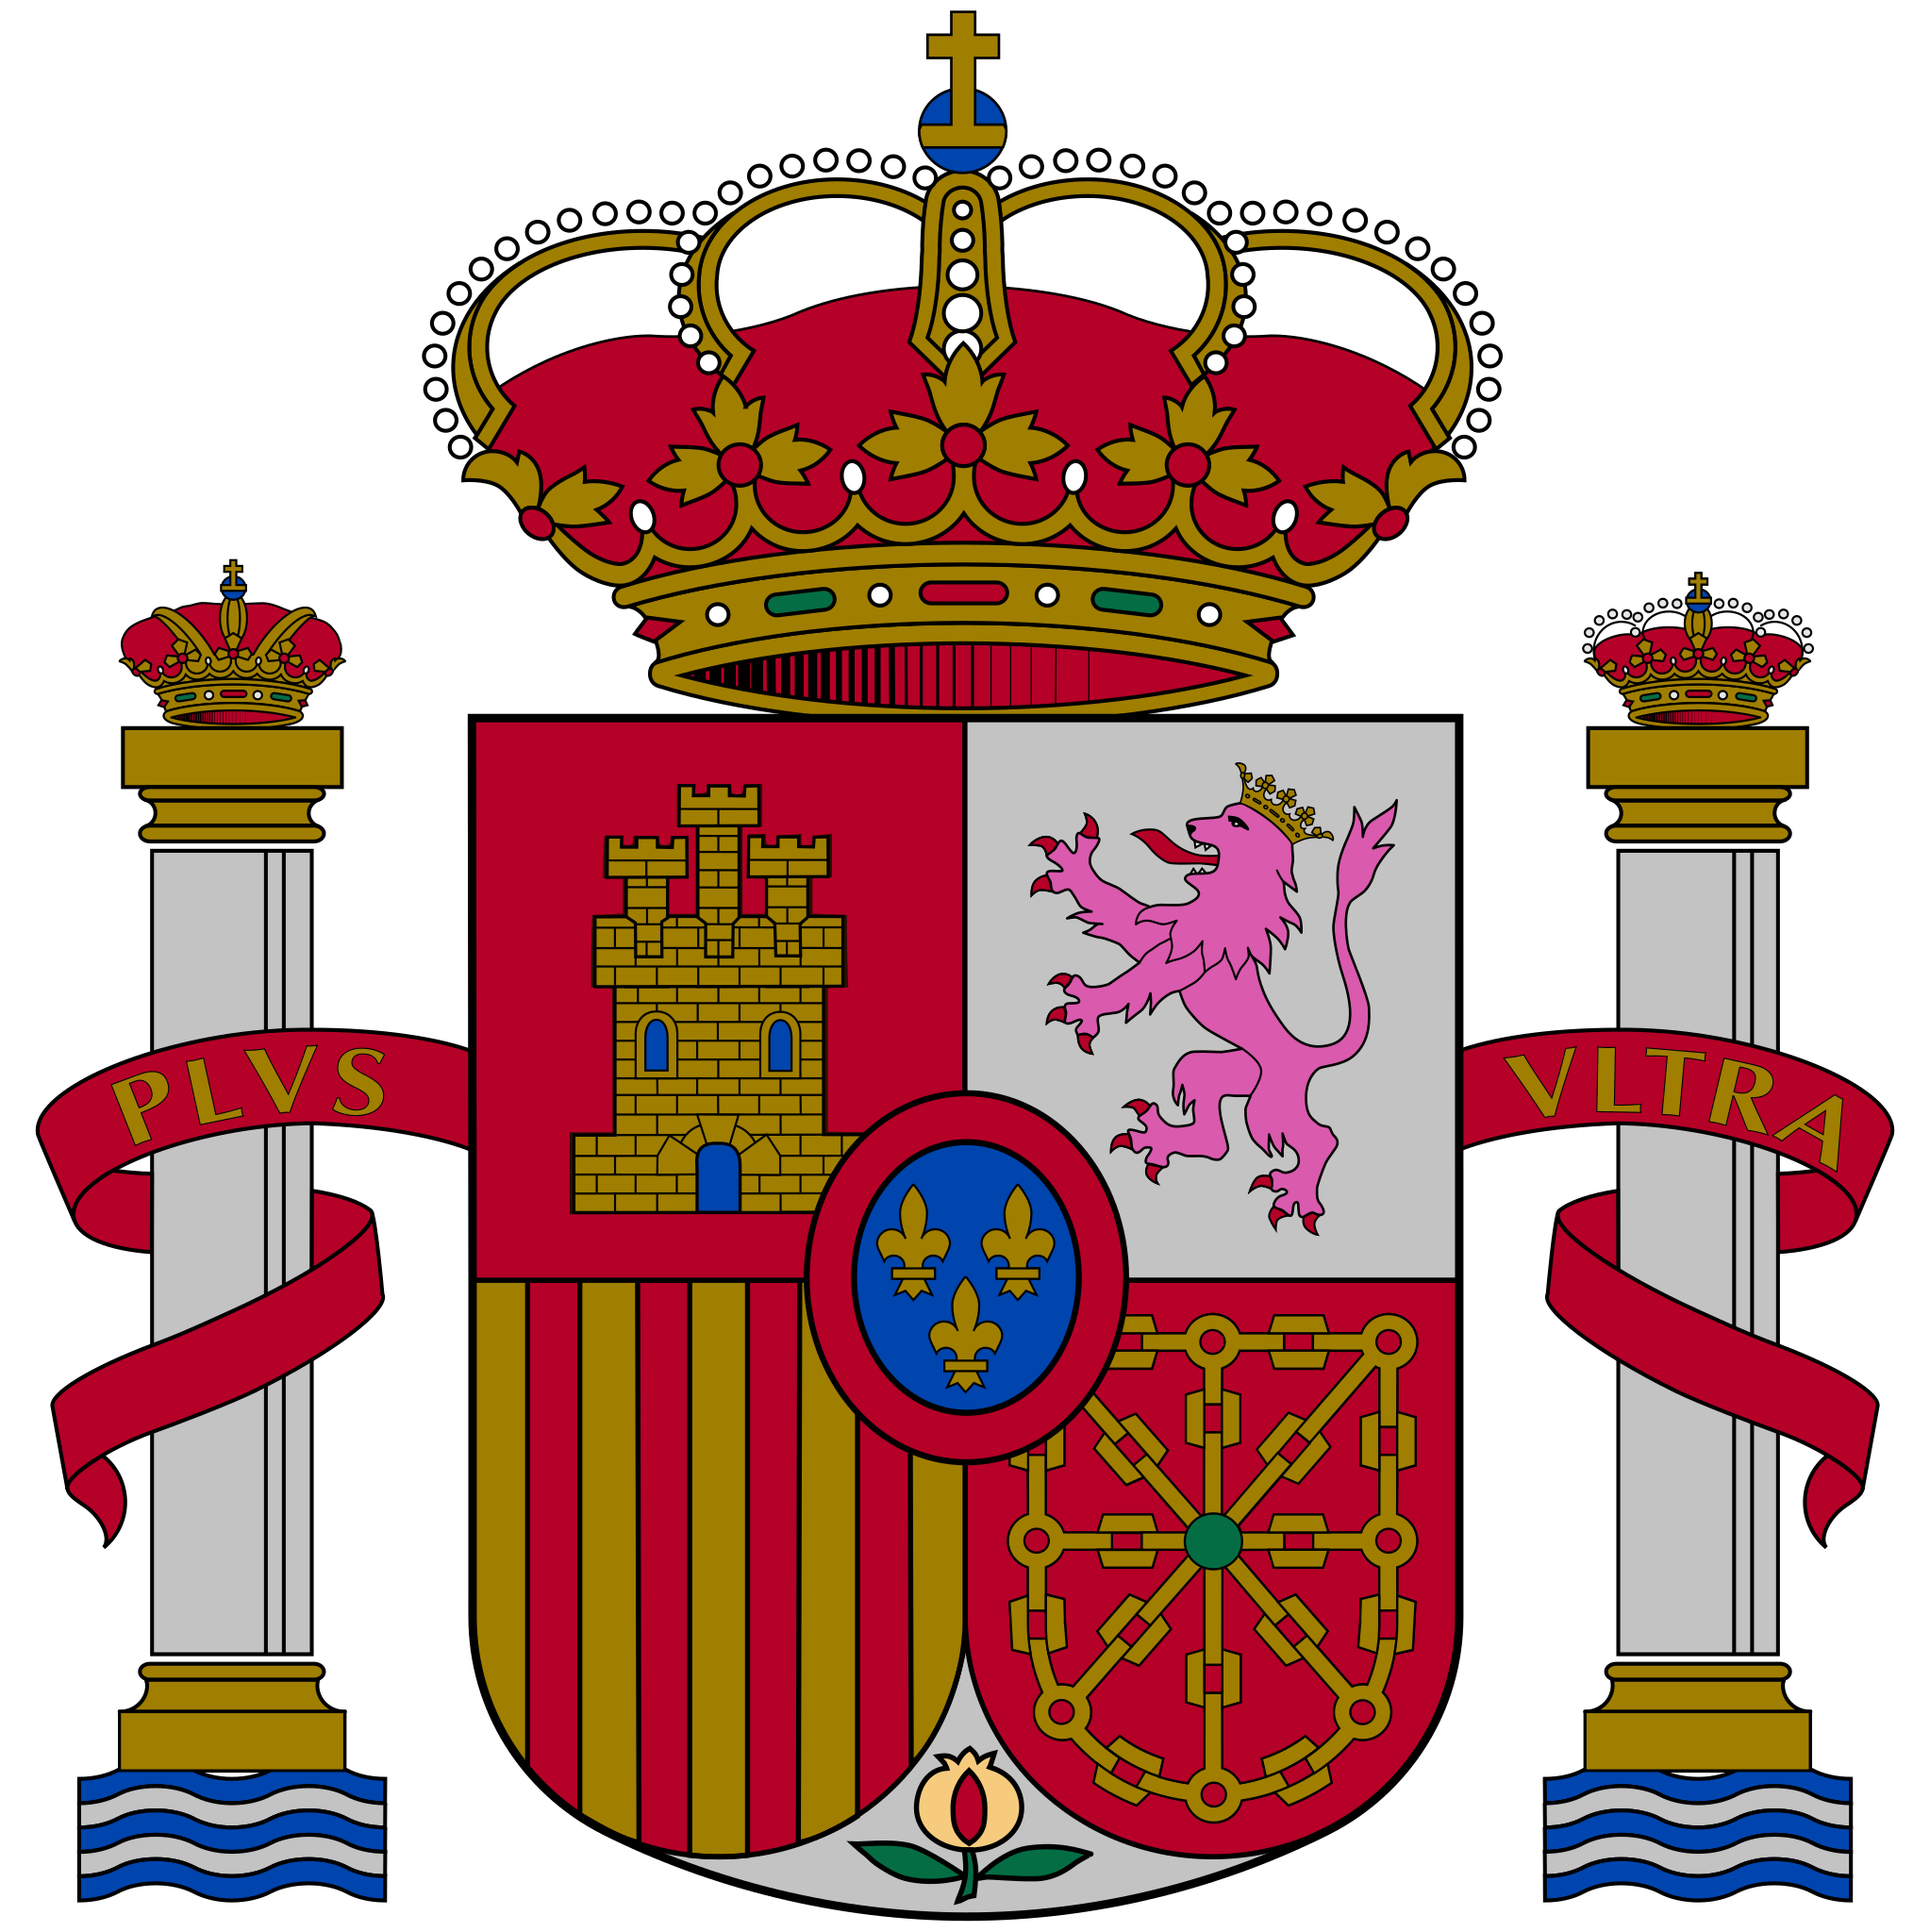 Coat of arms of Kingdom of Spain